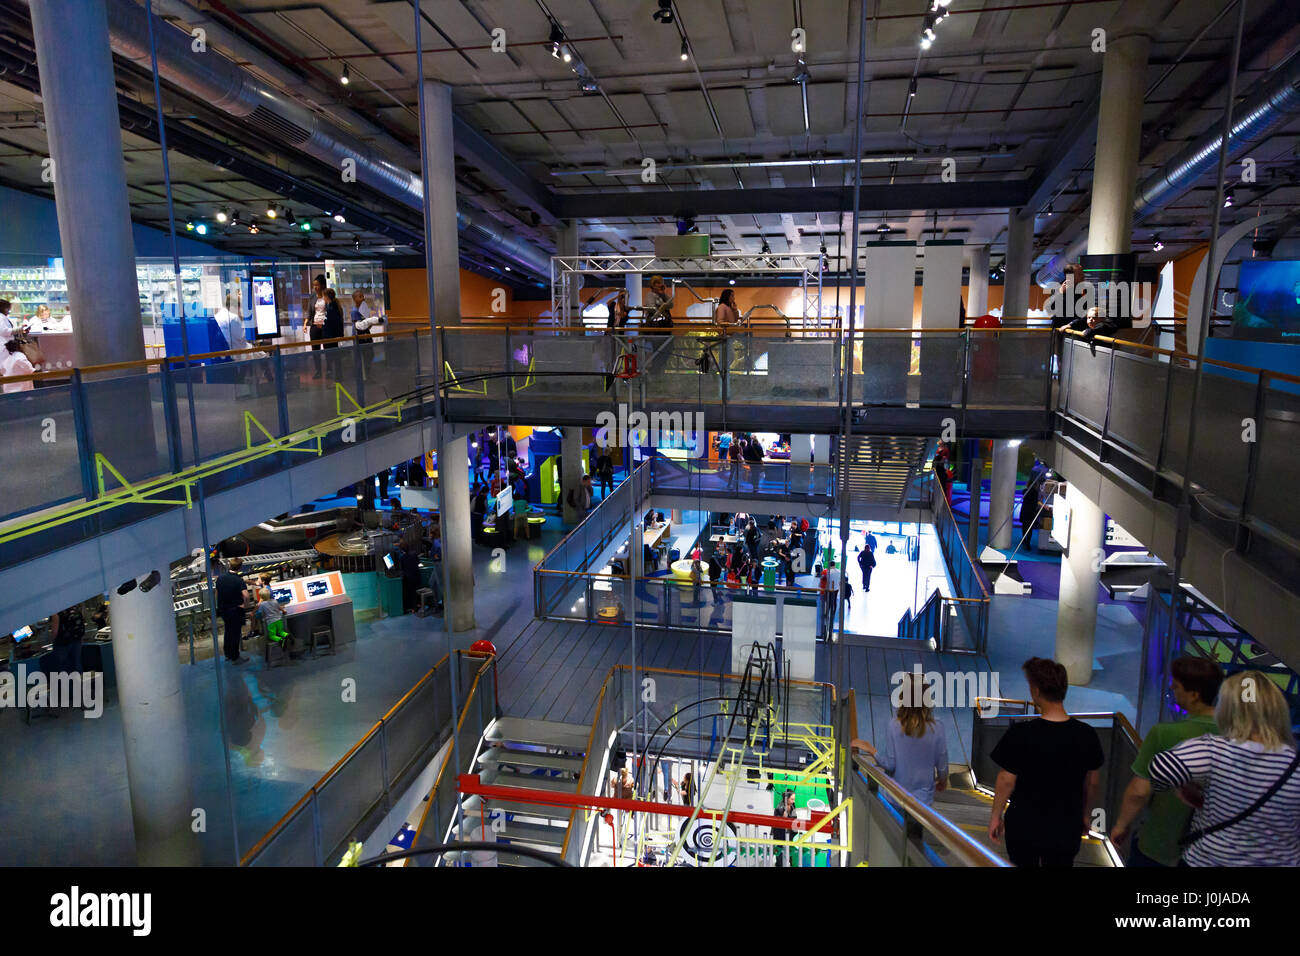 AMSTERDAM, NETHERLANDS - JULY 2, 2016 : General interior view of Nemo Science Museum. Nemo is a popular interactive science and technology museum in A Stock Photo